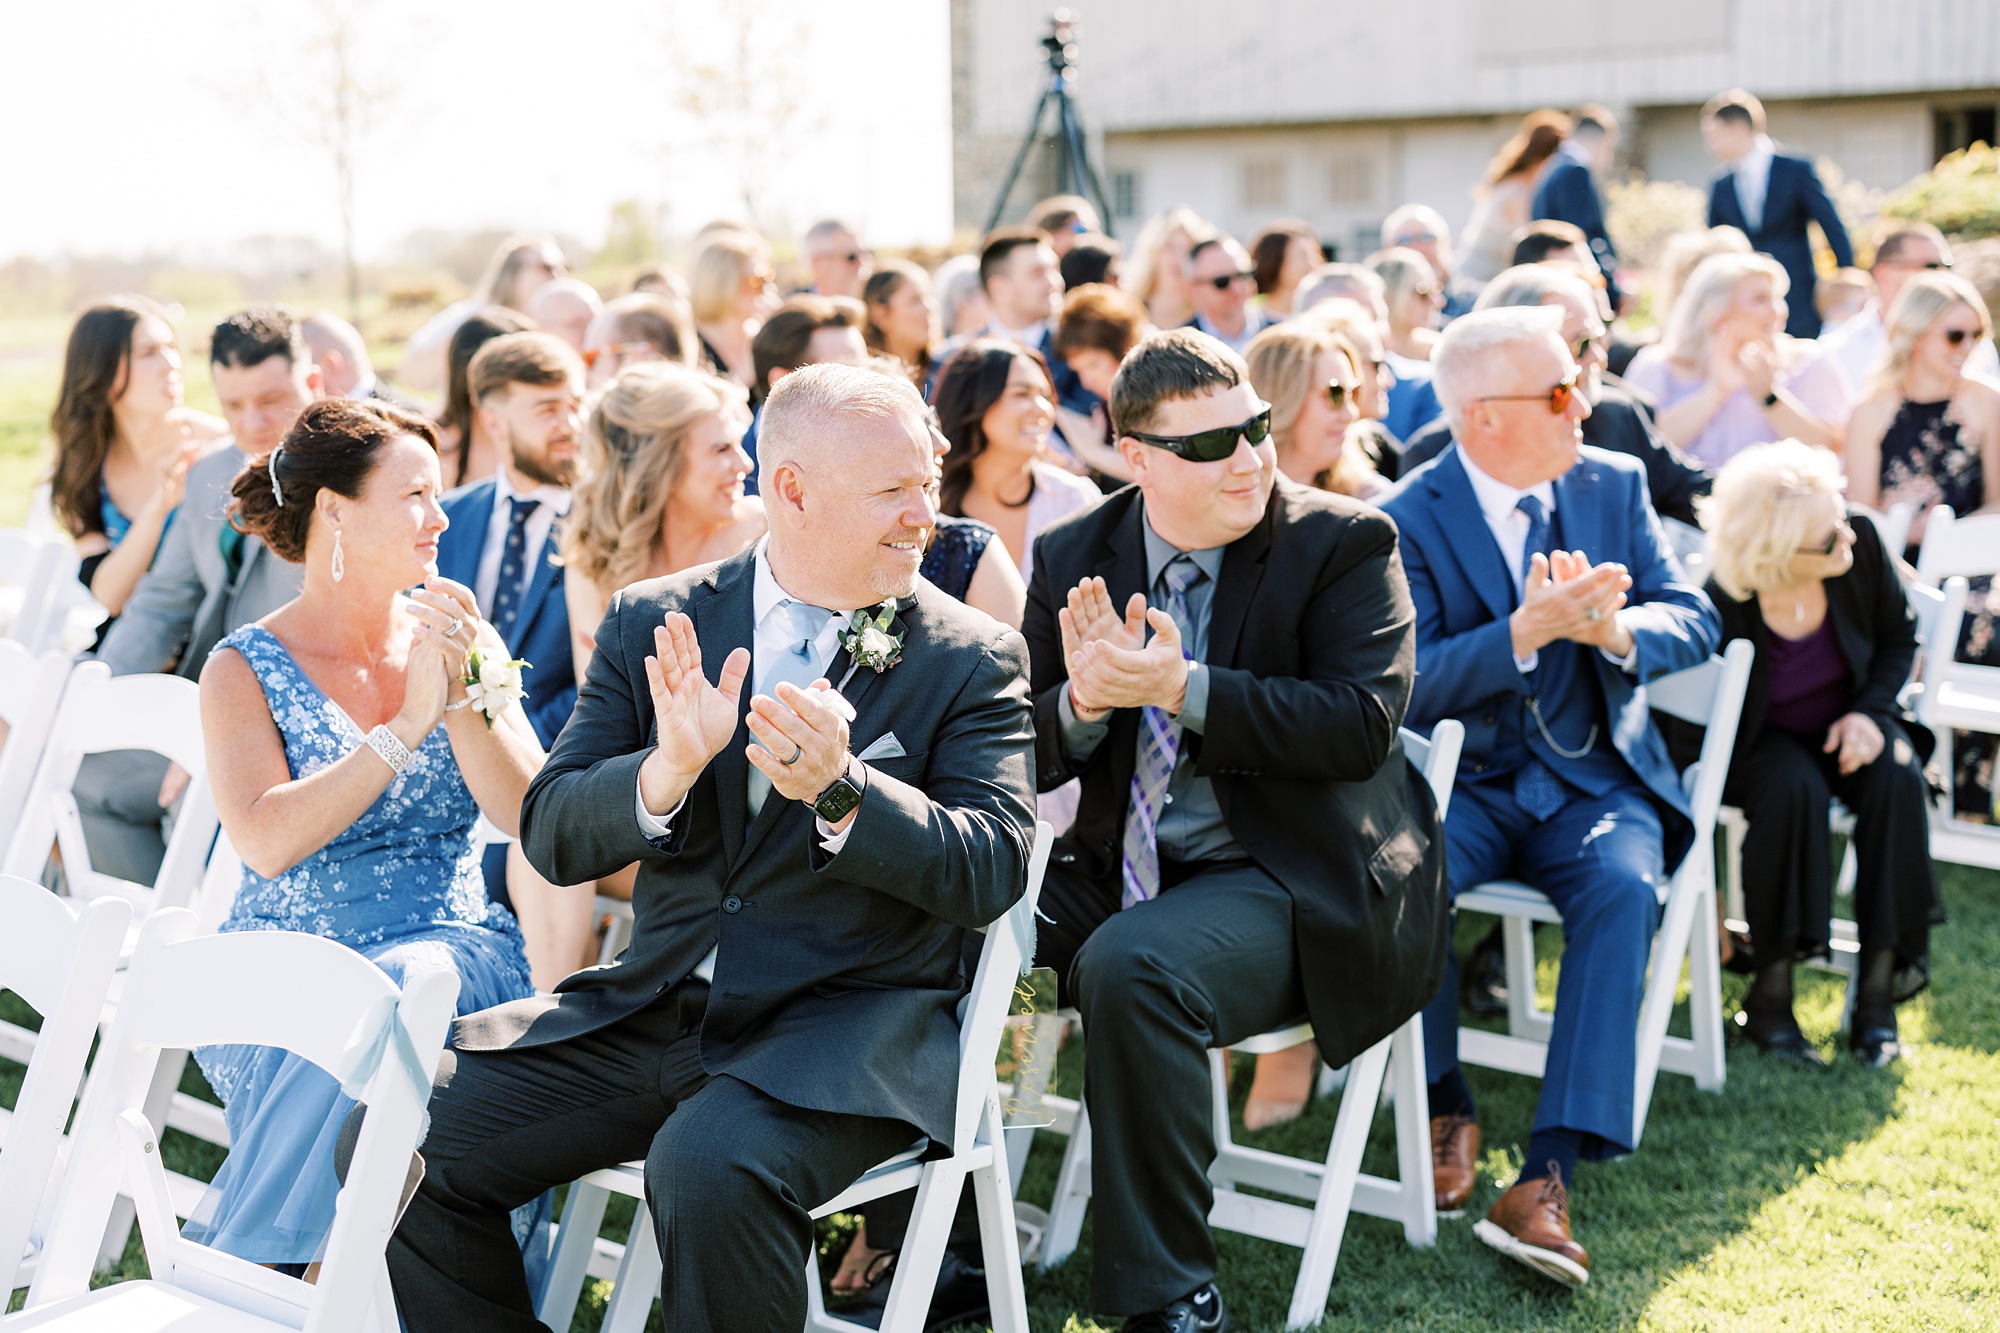 guests clap for groom to enter during outdoor wedding ceremony on the lawn of French Creek Golf Club